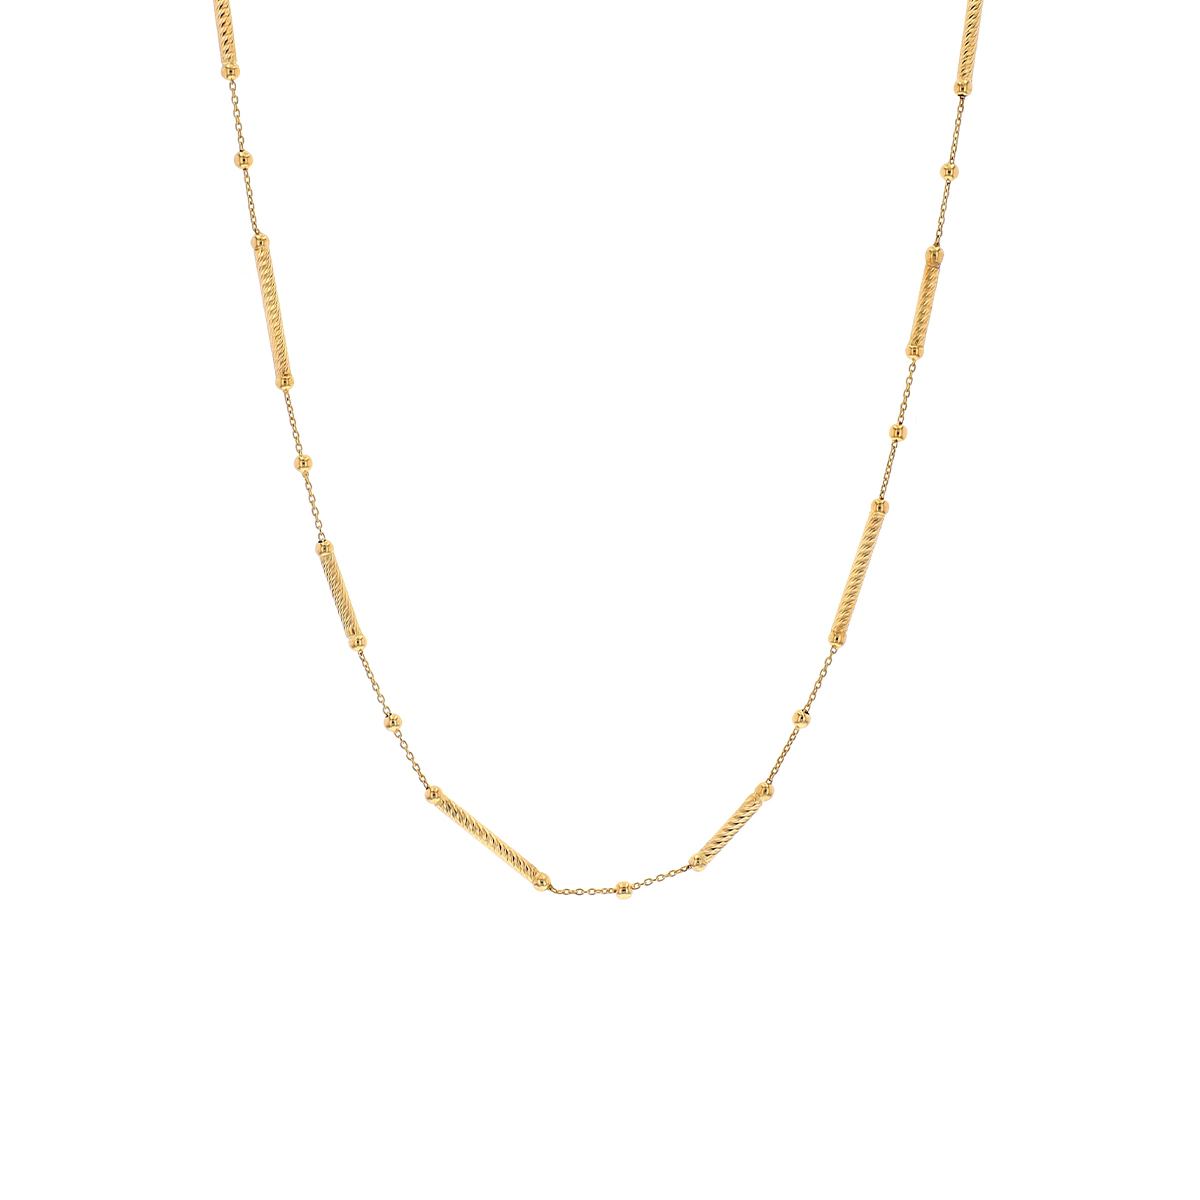 14K Yellow Gold 18-Inch Beads & Bars Necklace